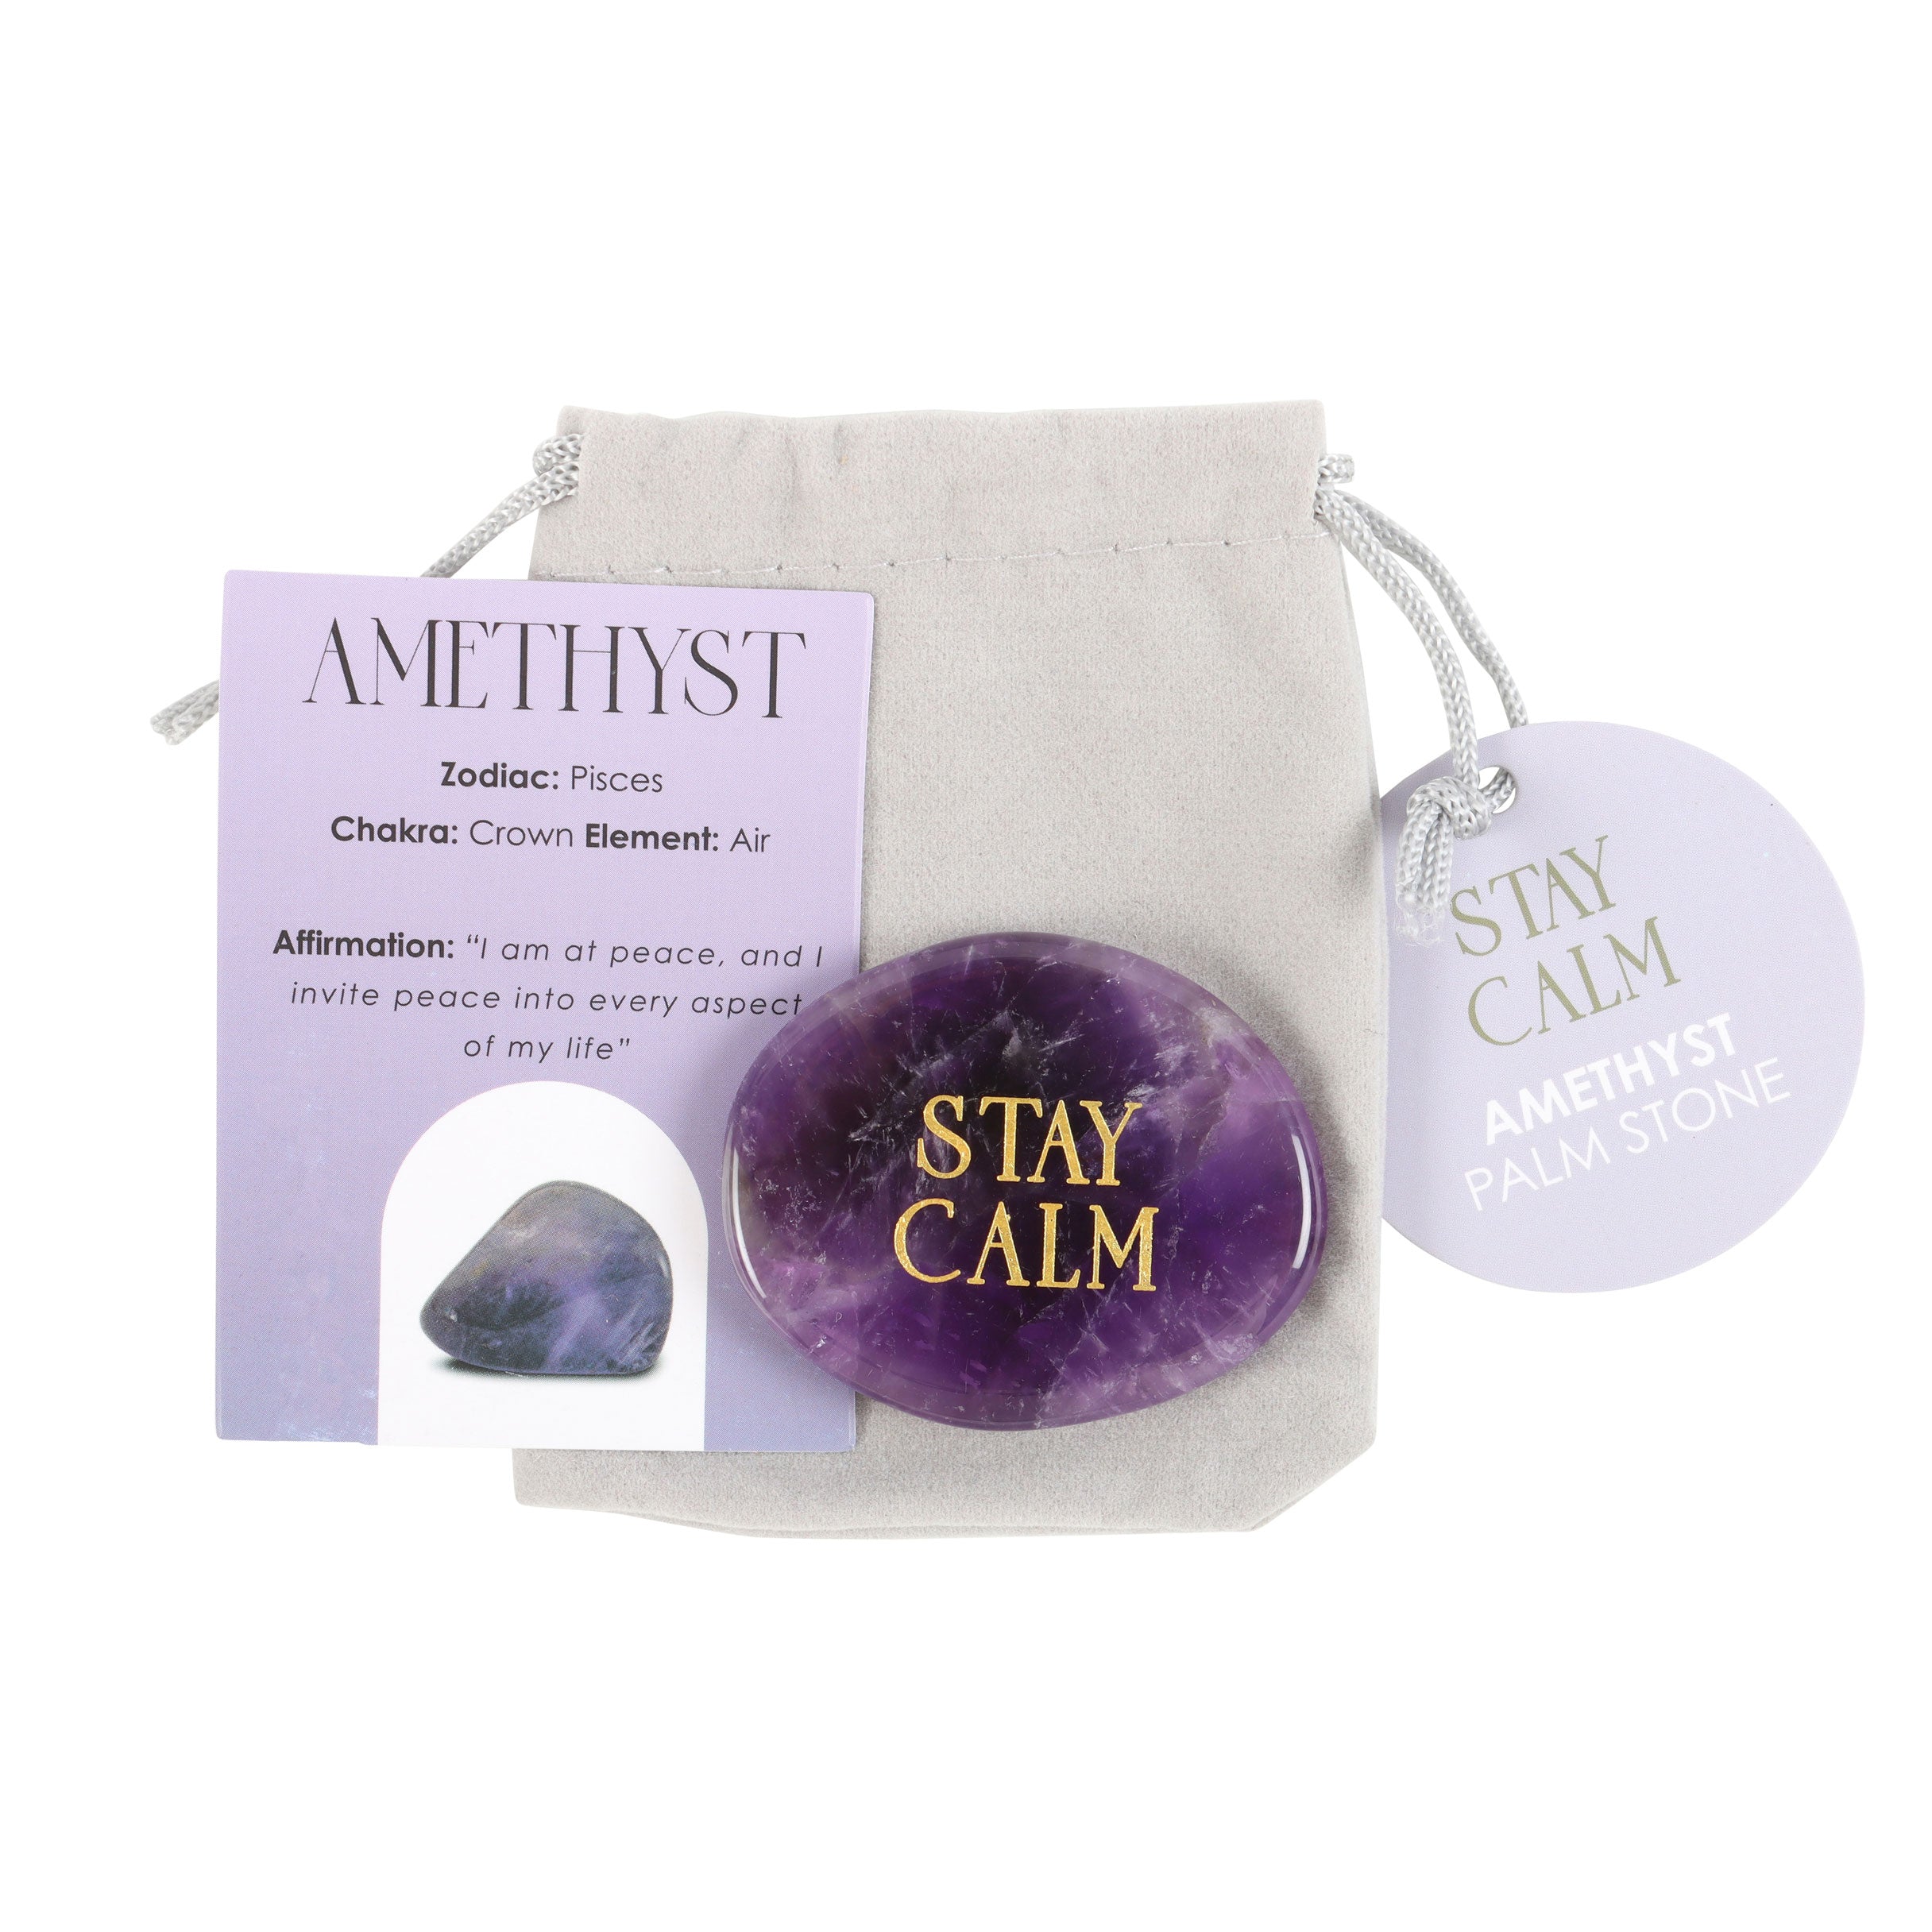 View Stay Calm Amethyst Crystal Palm Stone information